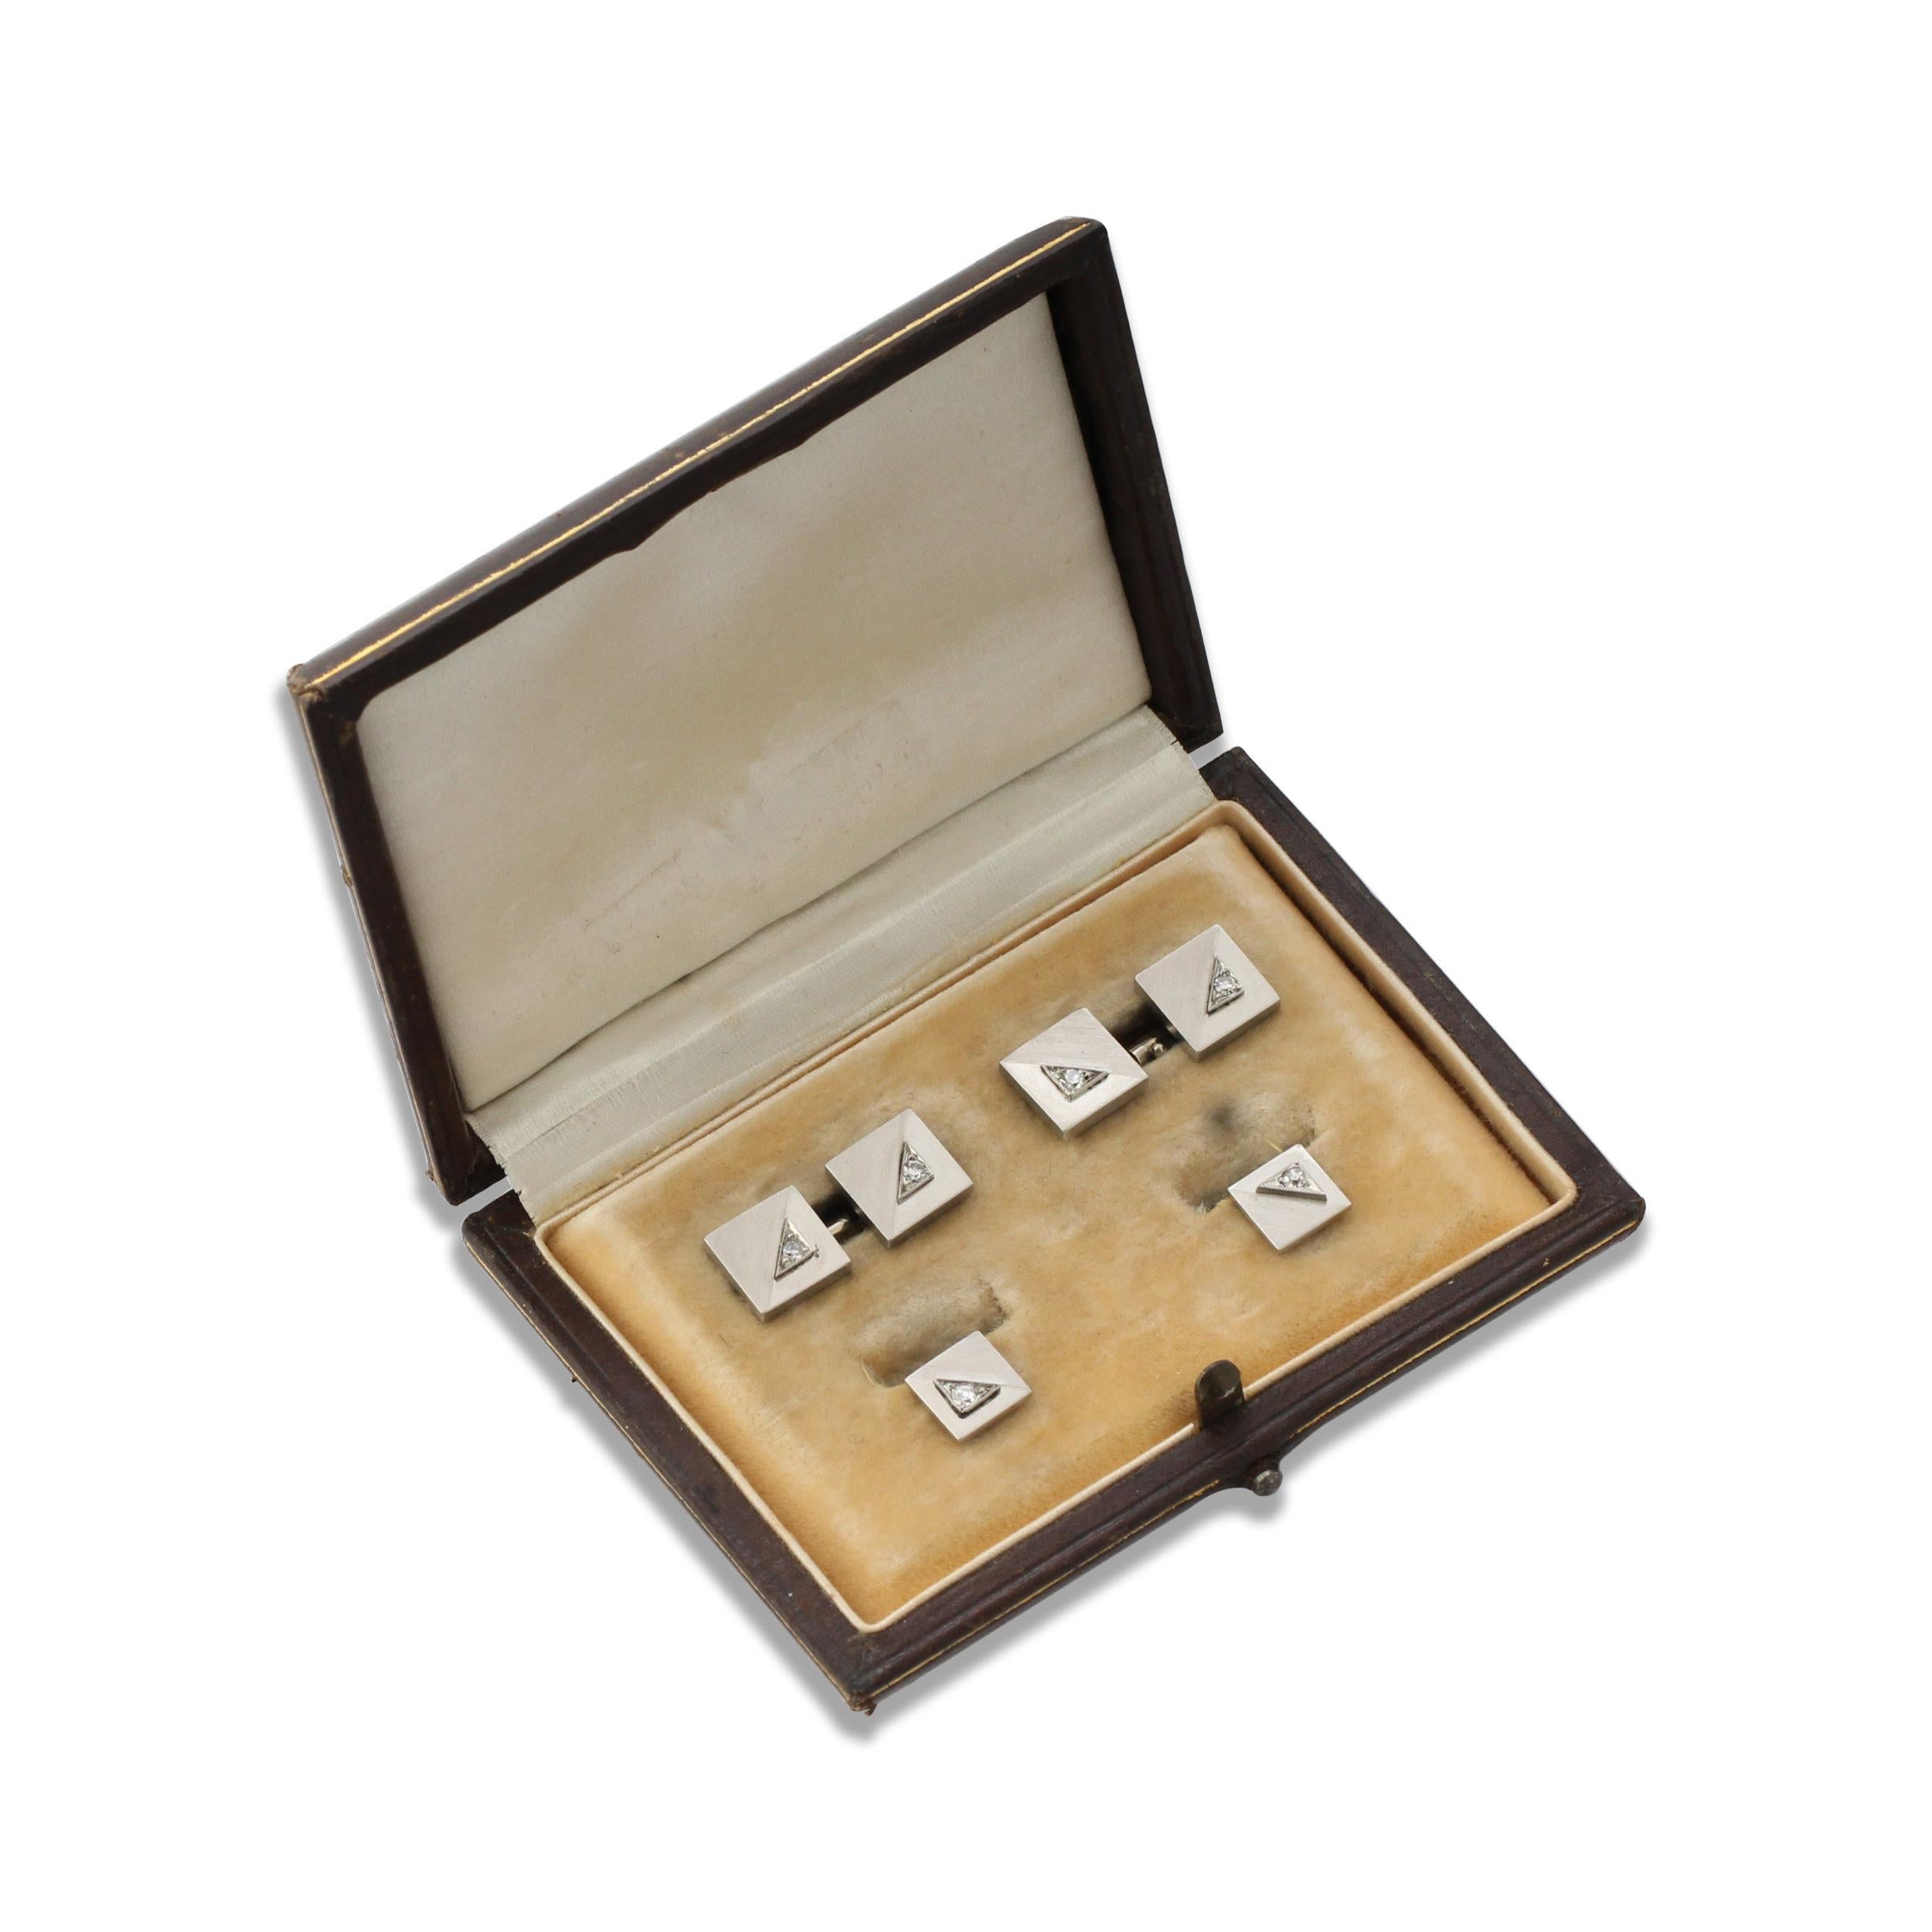 A platinum and diamond Art Deco set of Cufflinks and Studs. Each side is set with a single diamond and a square design with a brushed finish across half of each square. Origin: French. With a Fitted Box.